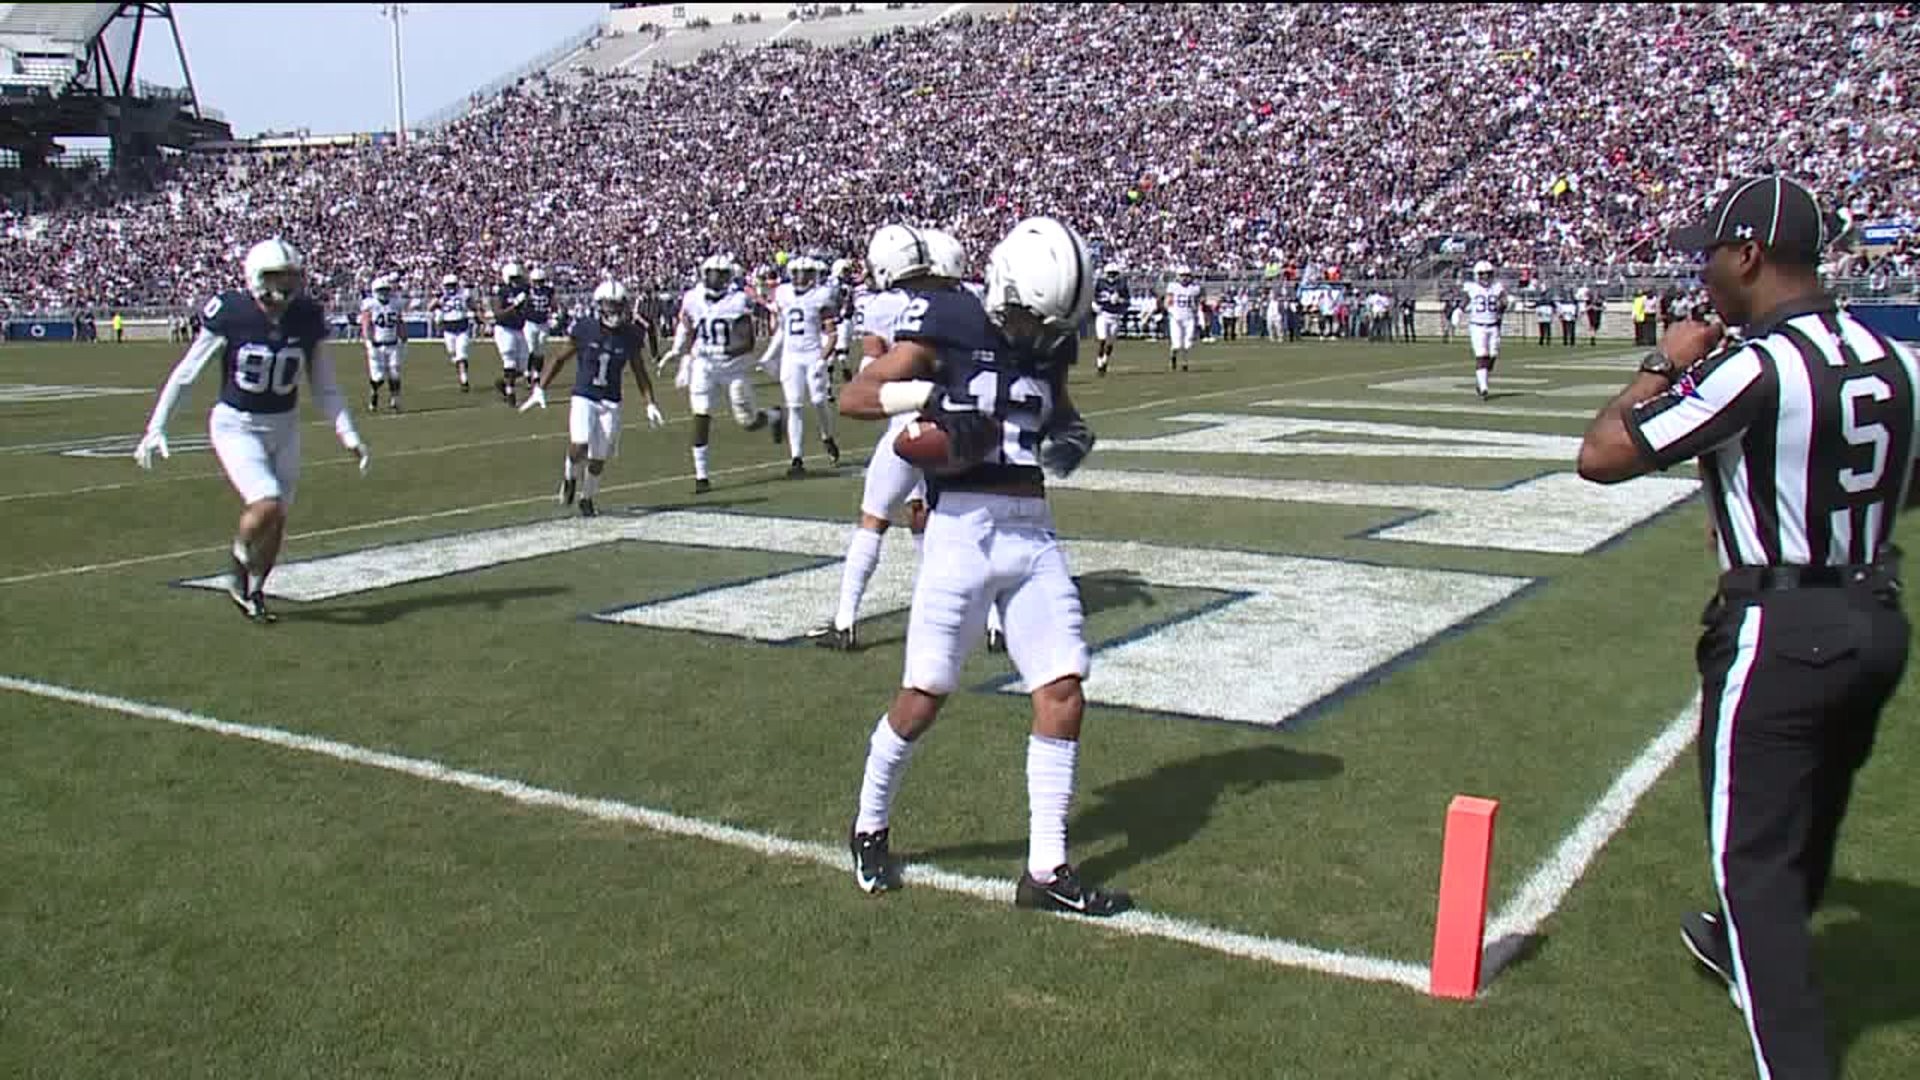 Nittany Lions Spring Ahead After Blue White Game